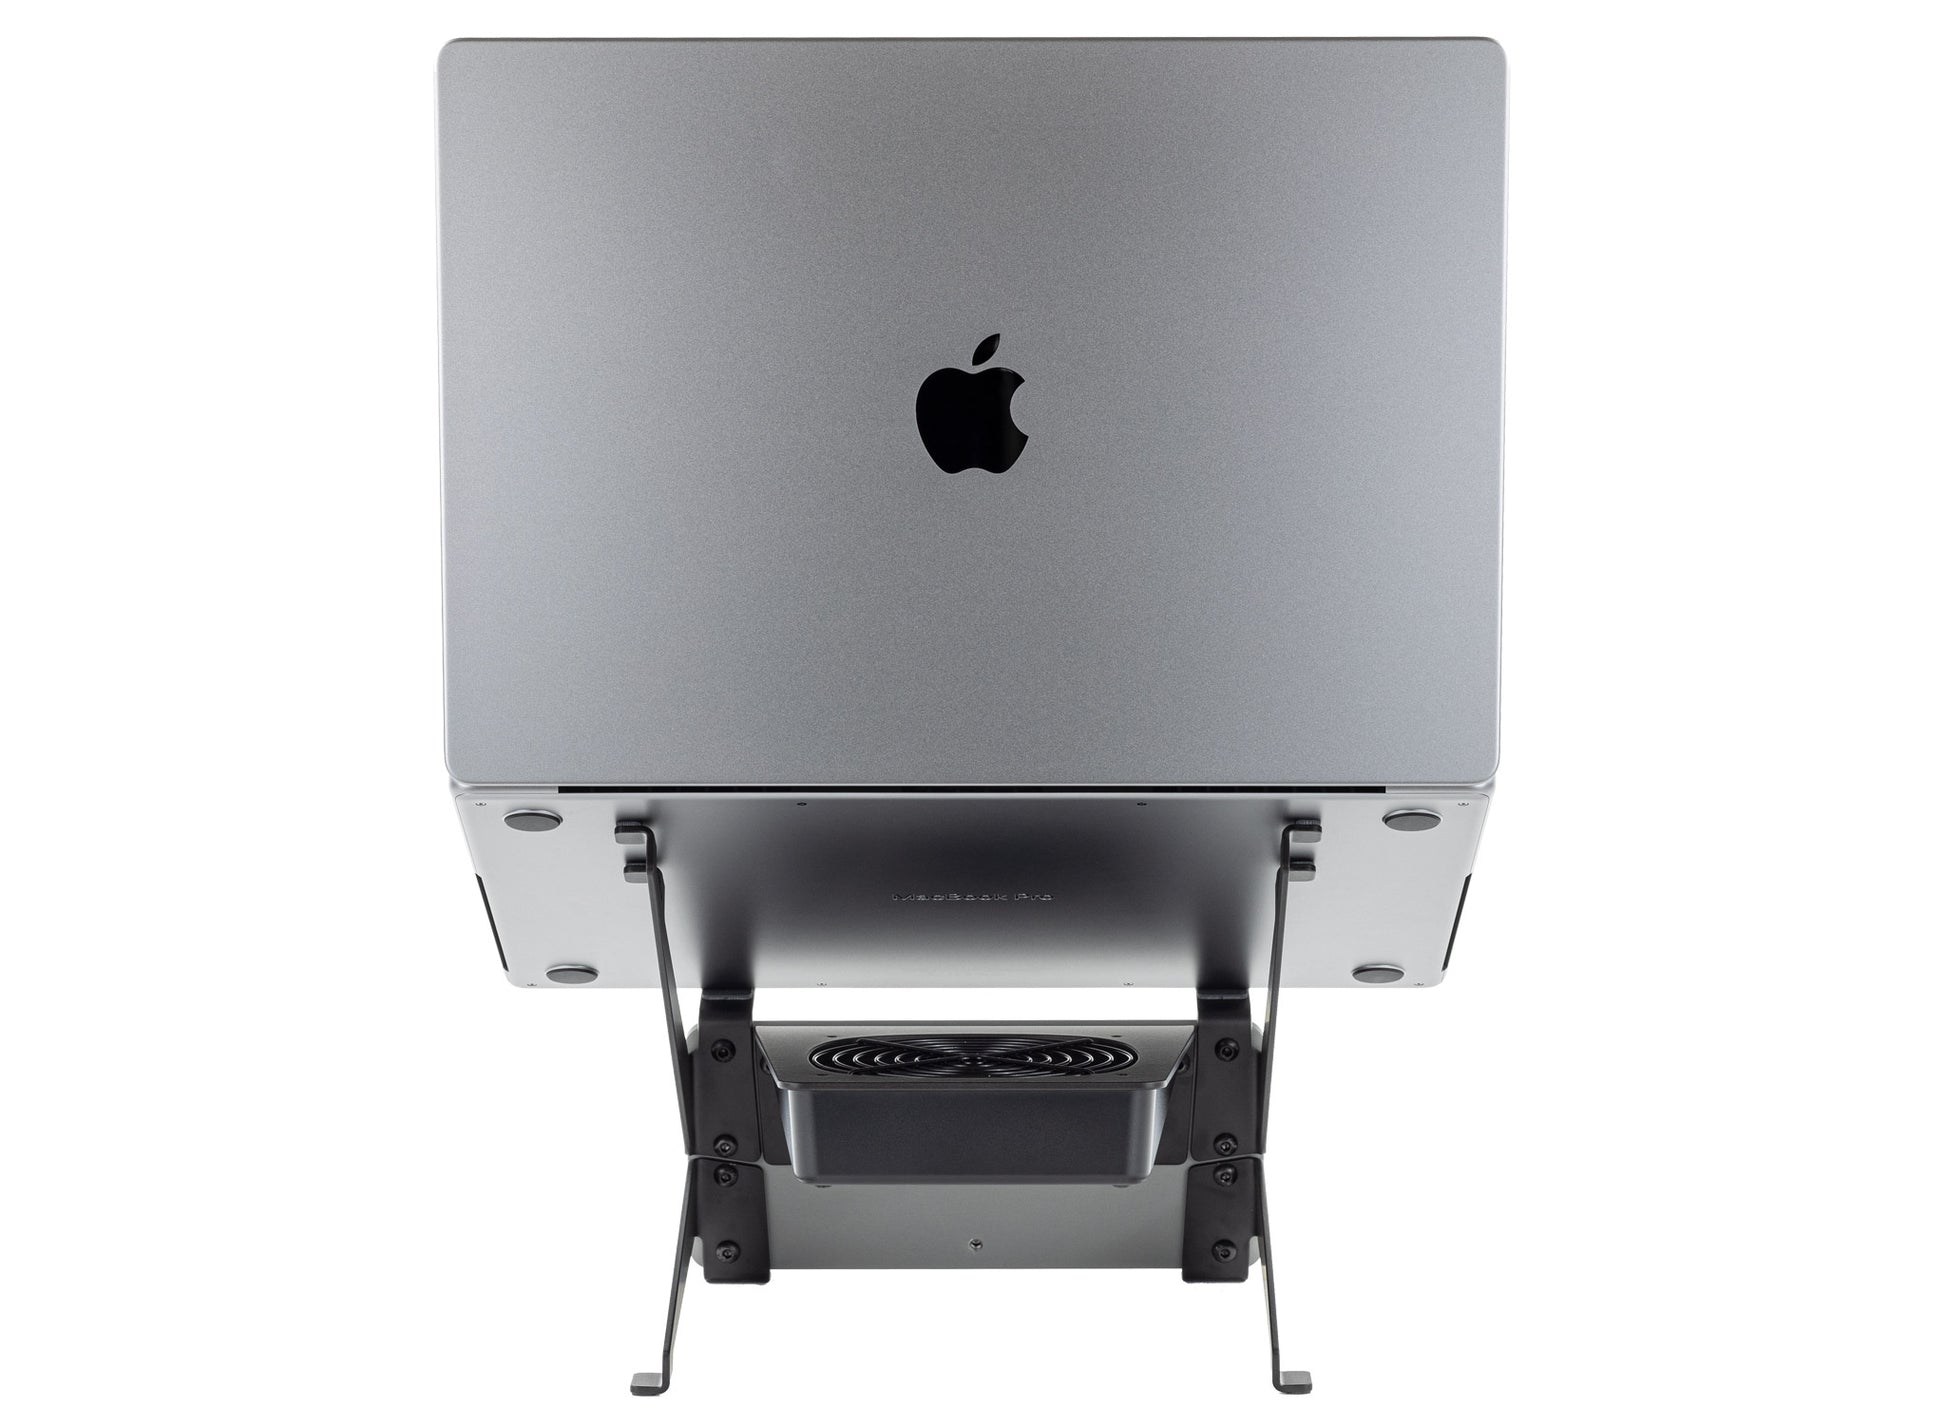 SVALT Cooling Stand model SRxB14 gray back view for quiet fan cooling performance with Apple laptop 2021 M1 Max 16-inch MacBook Pro